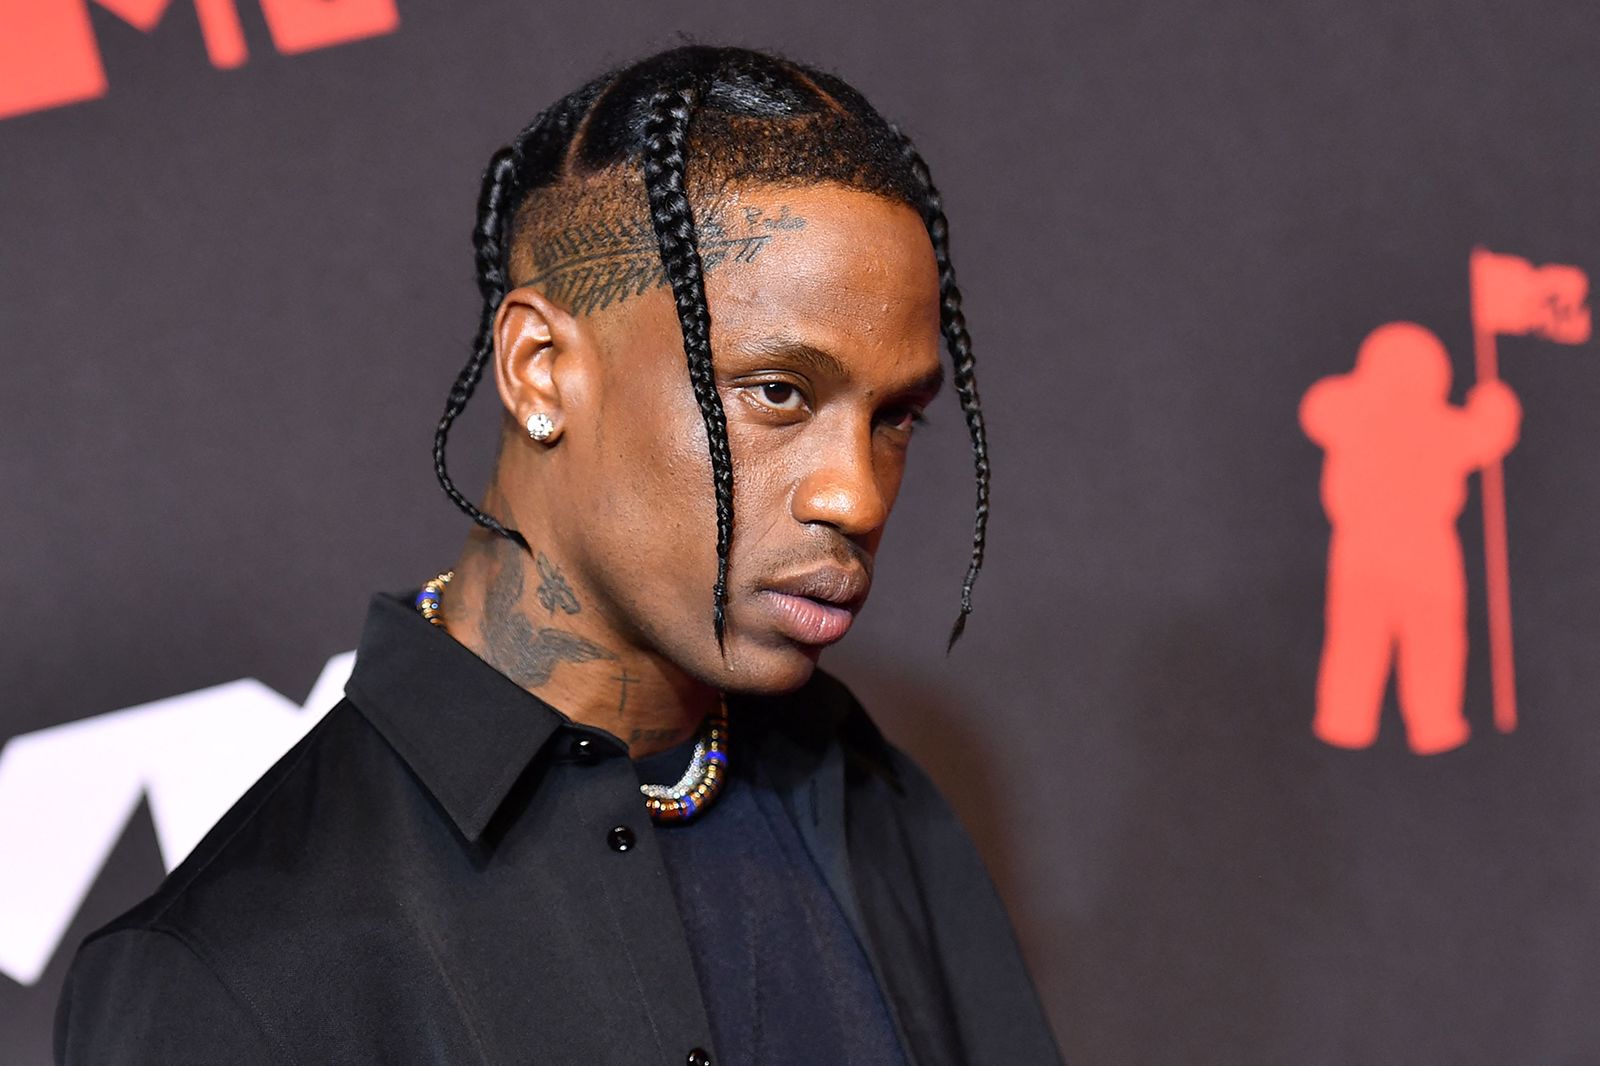 Travis Scott to take the stage tonight in first major appearance since Astroworld tragedy | CNN